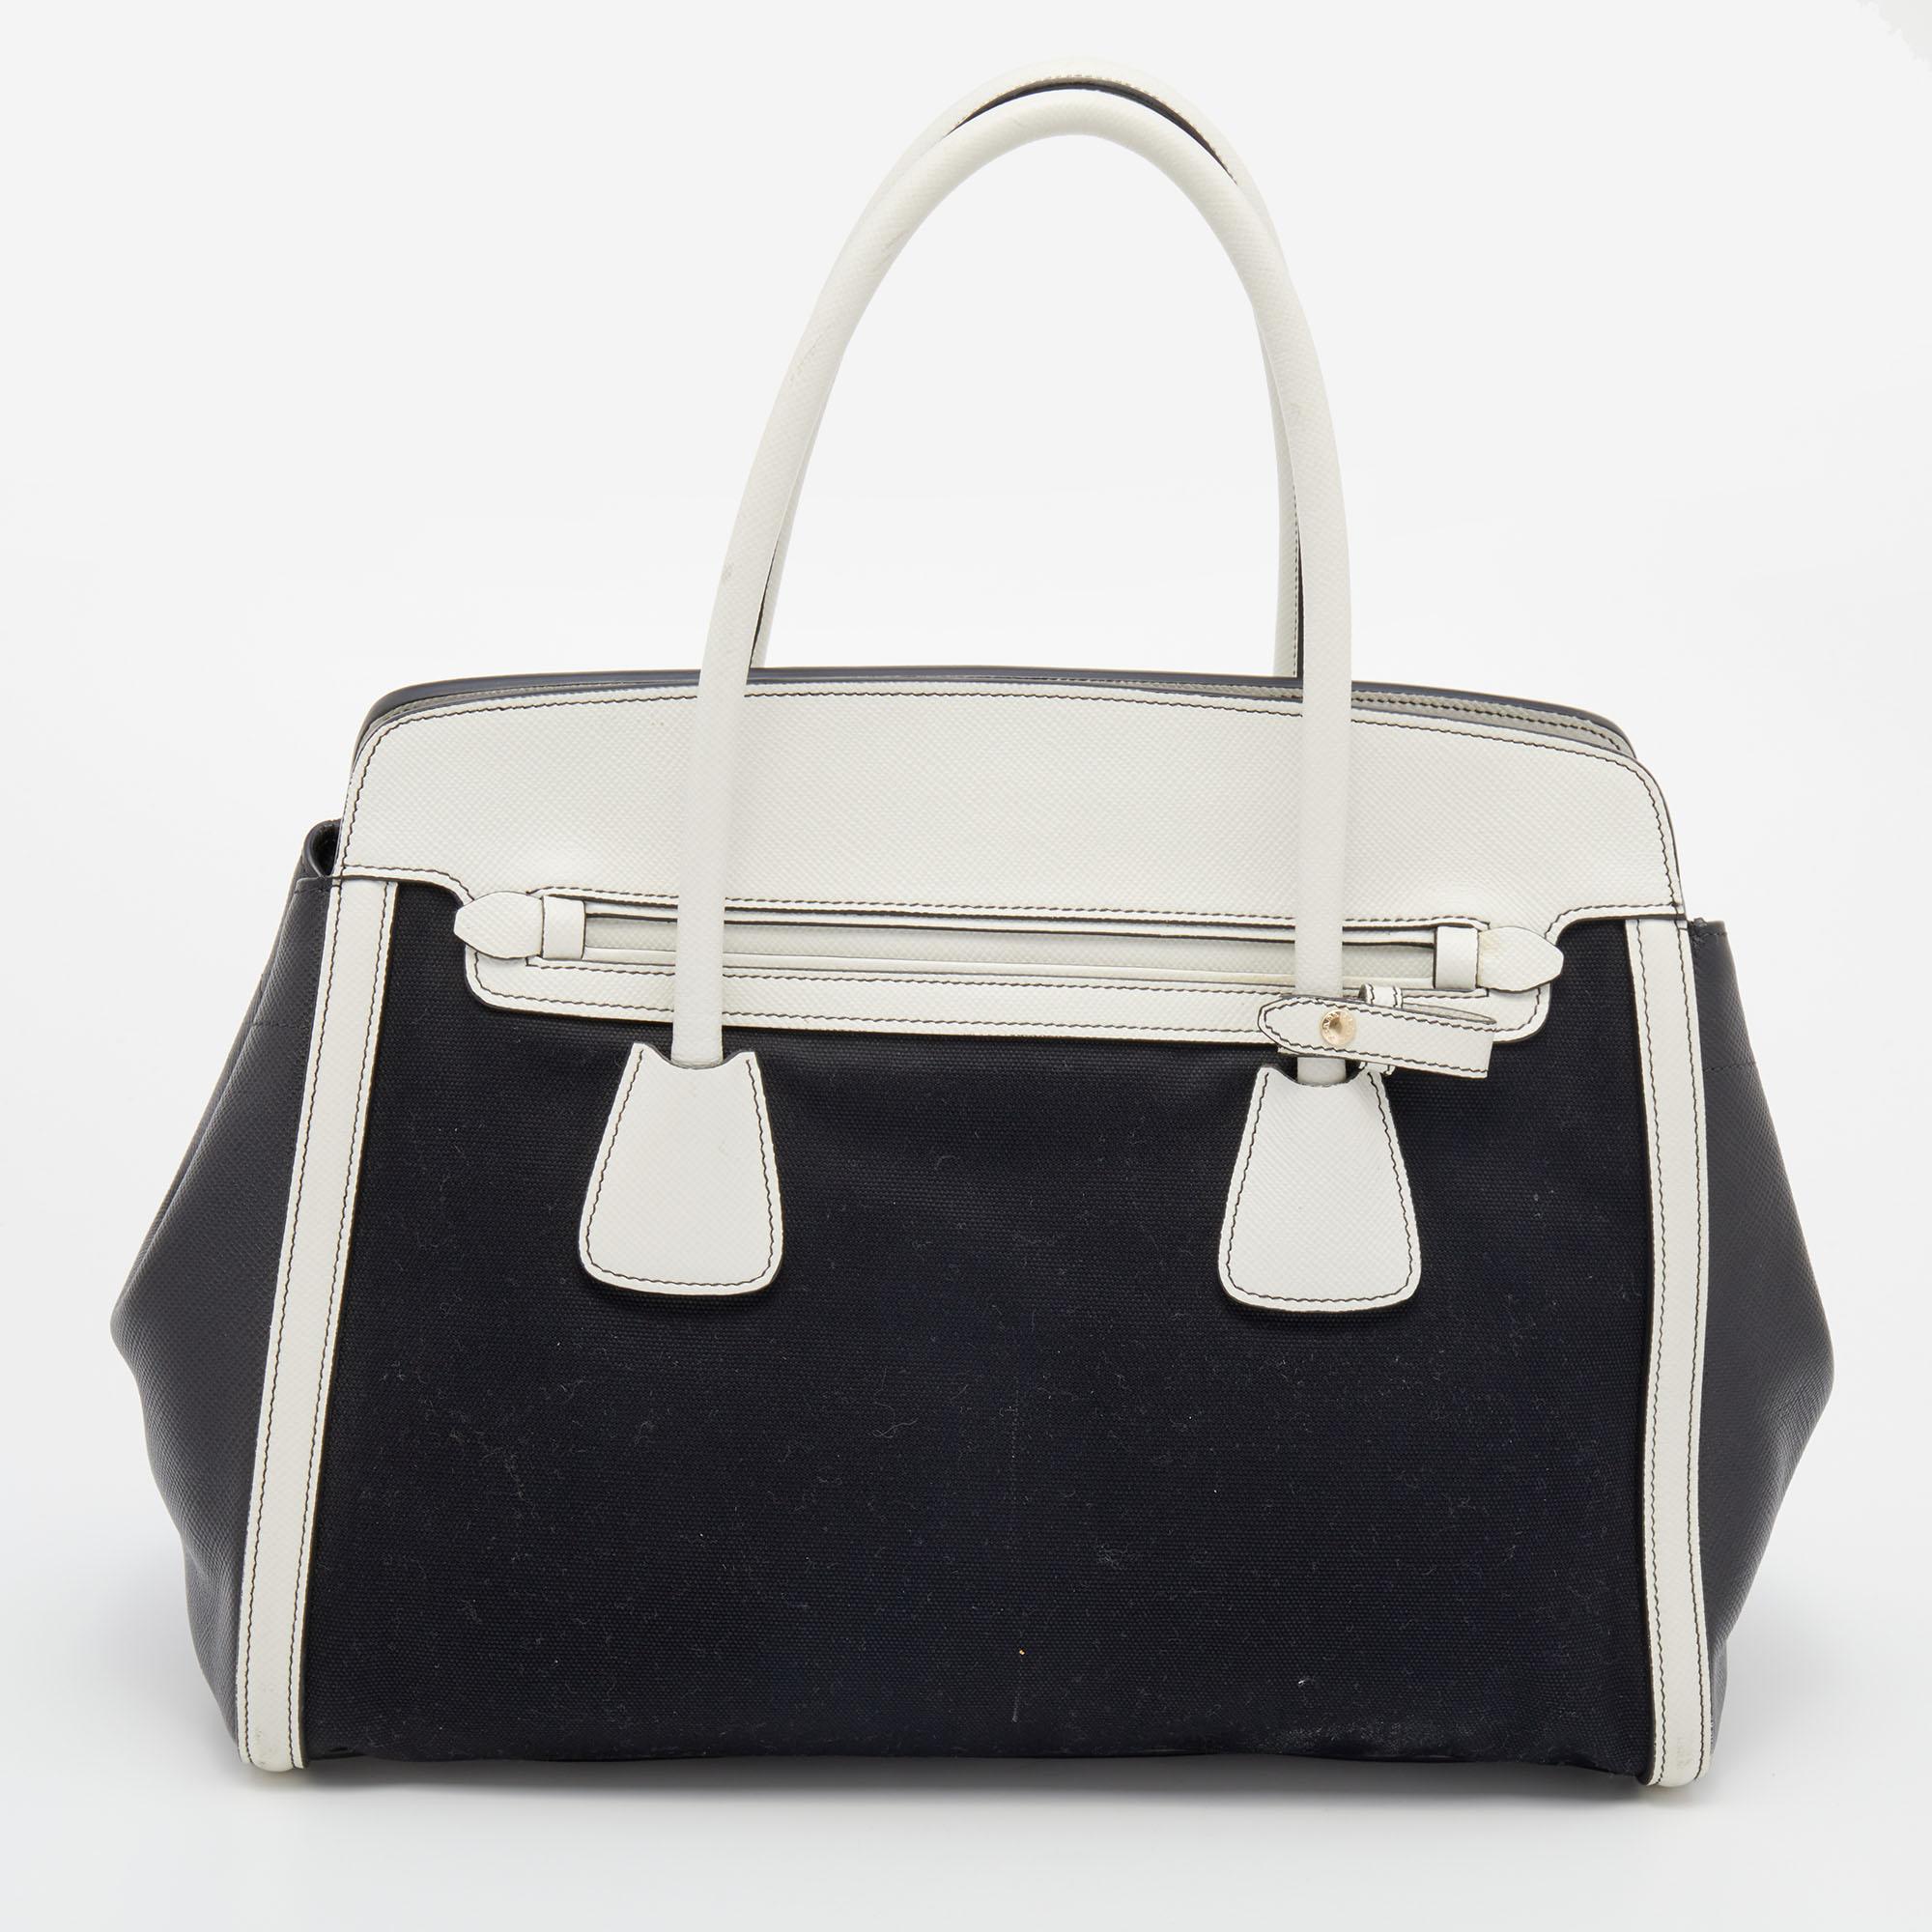 Prada showcases a masterfully designed tote for you to carry everywhere. Complemented with a black and white color combination, this fashionable bag is all you need in your closet. It has been crafted from canvas and leather into a structured shape